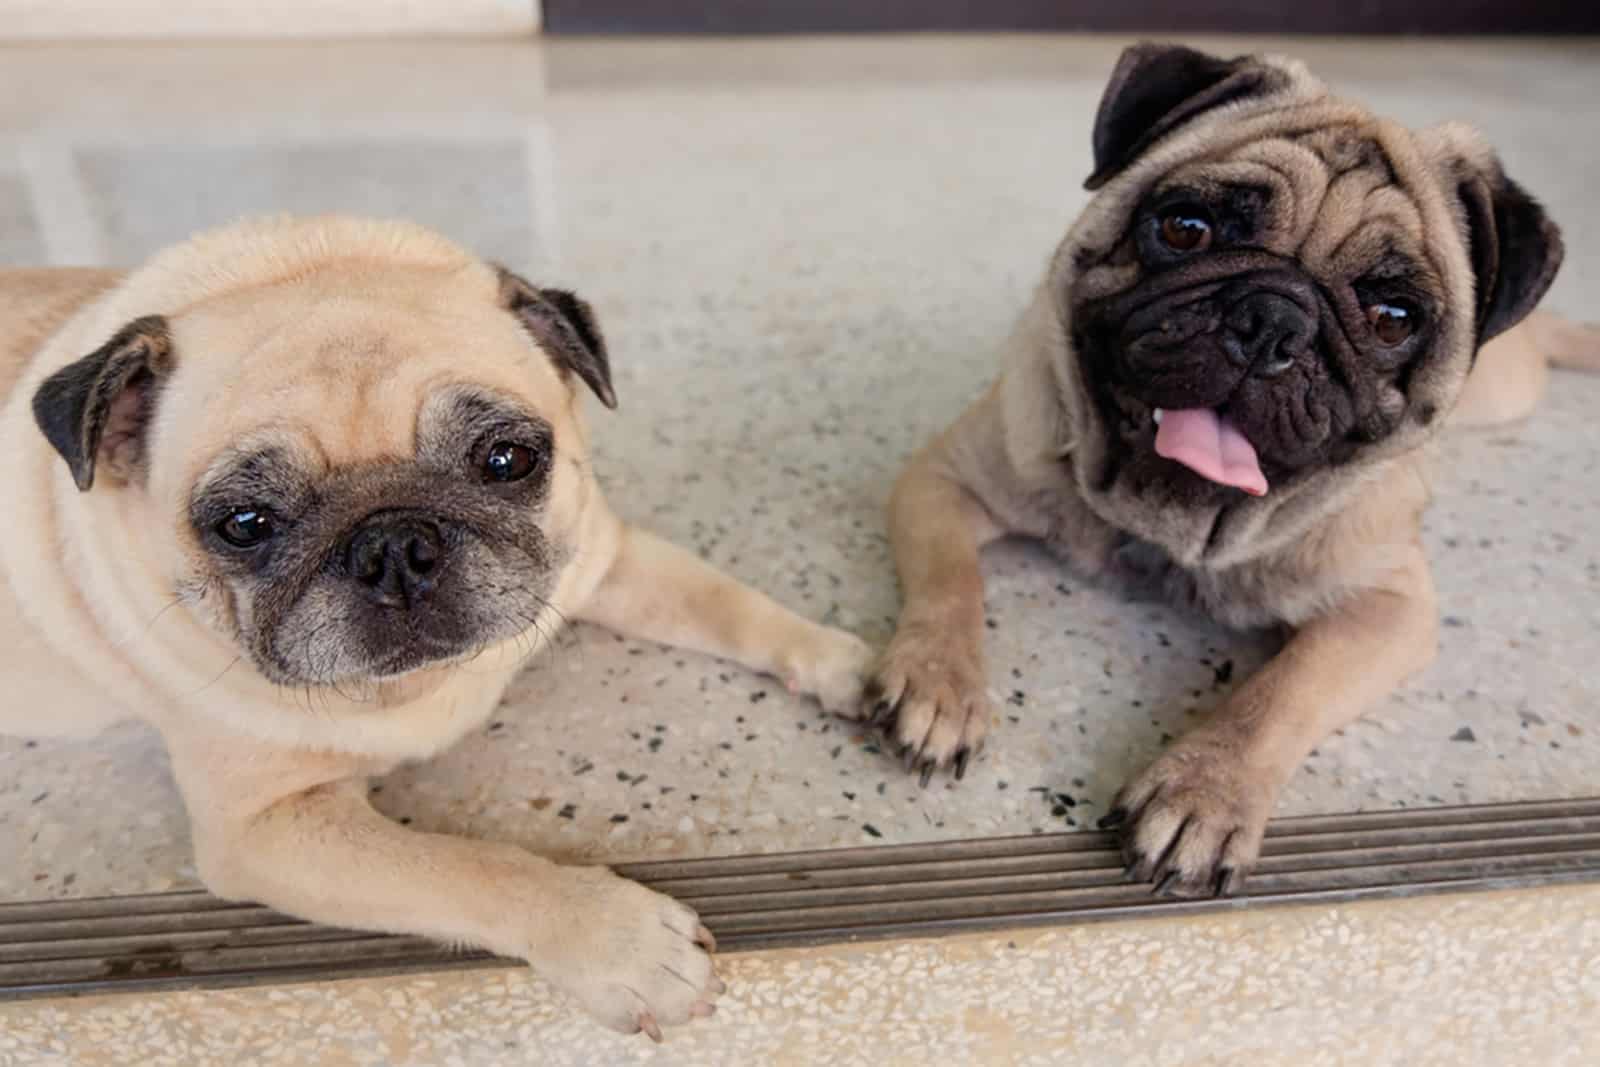 feamale and male pug dogs lying together on the floor